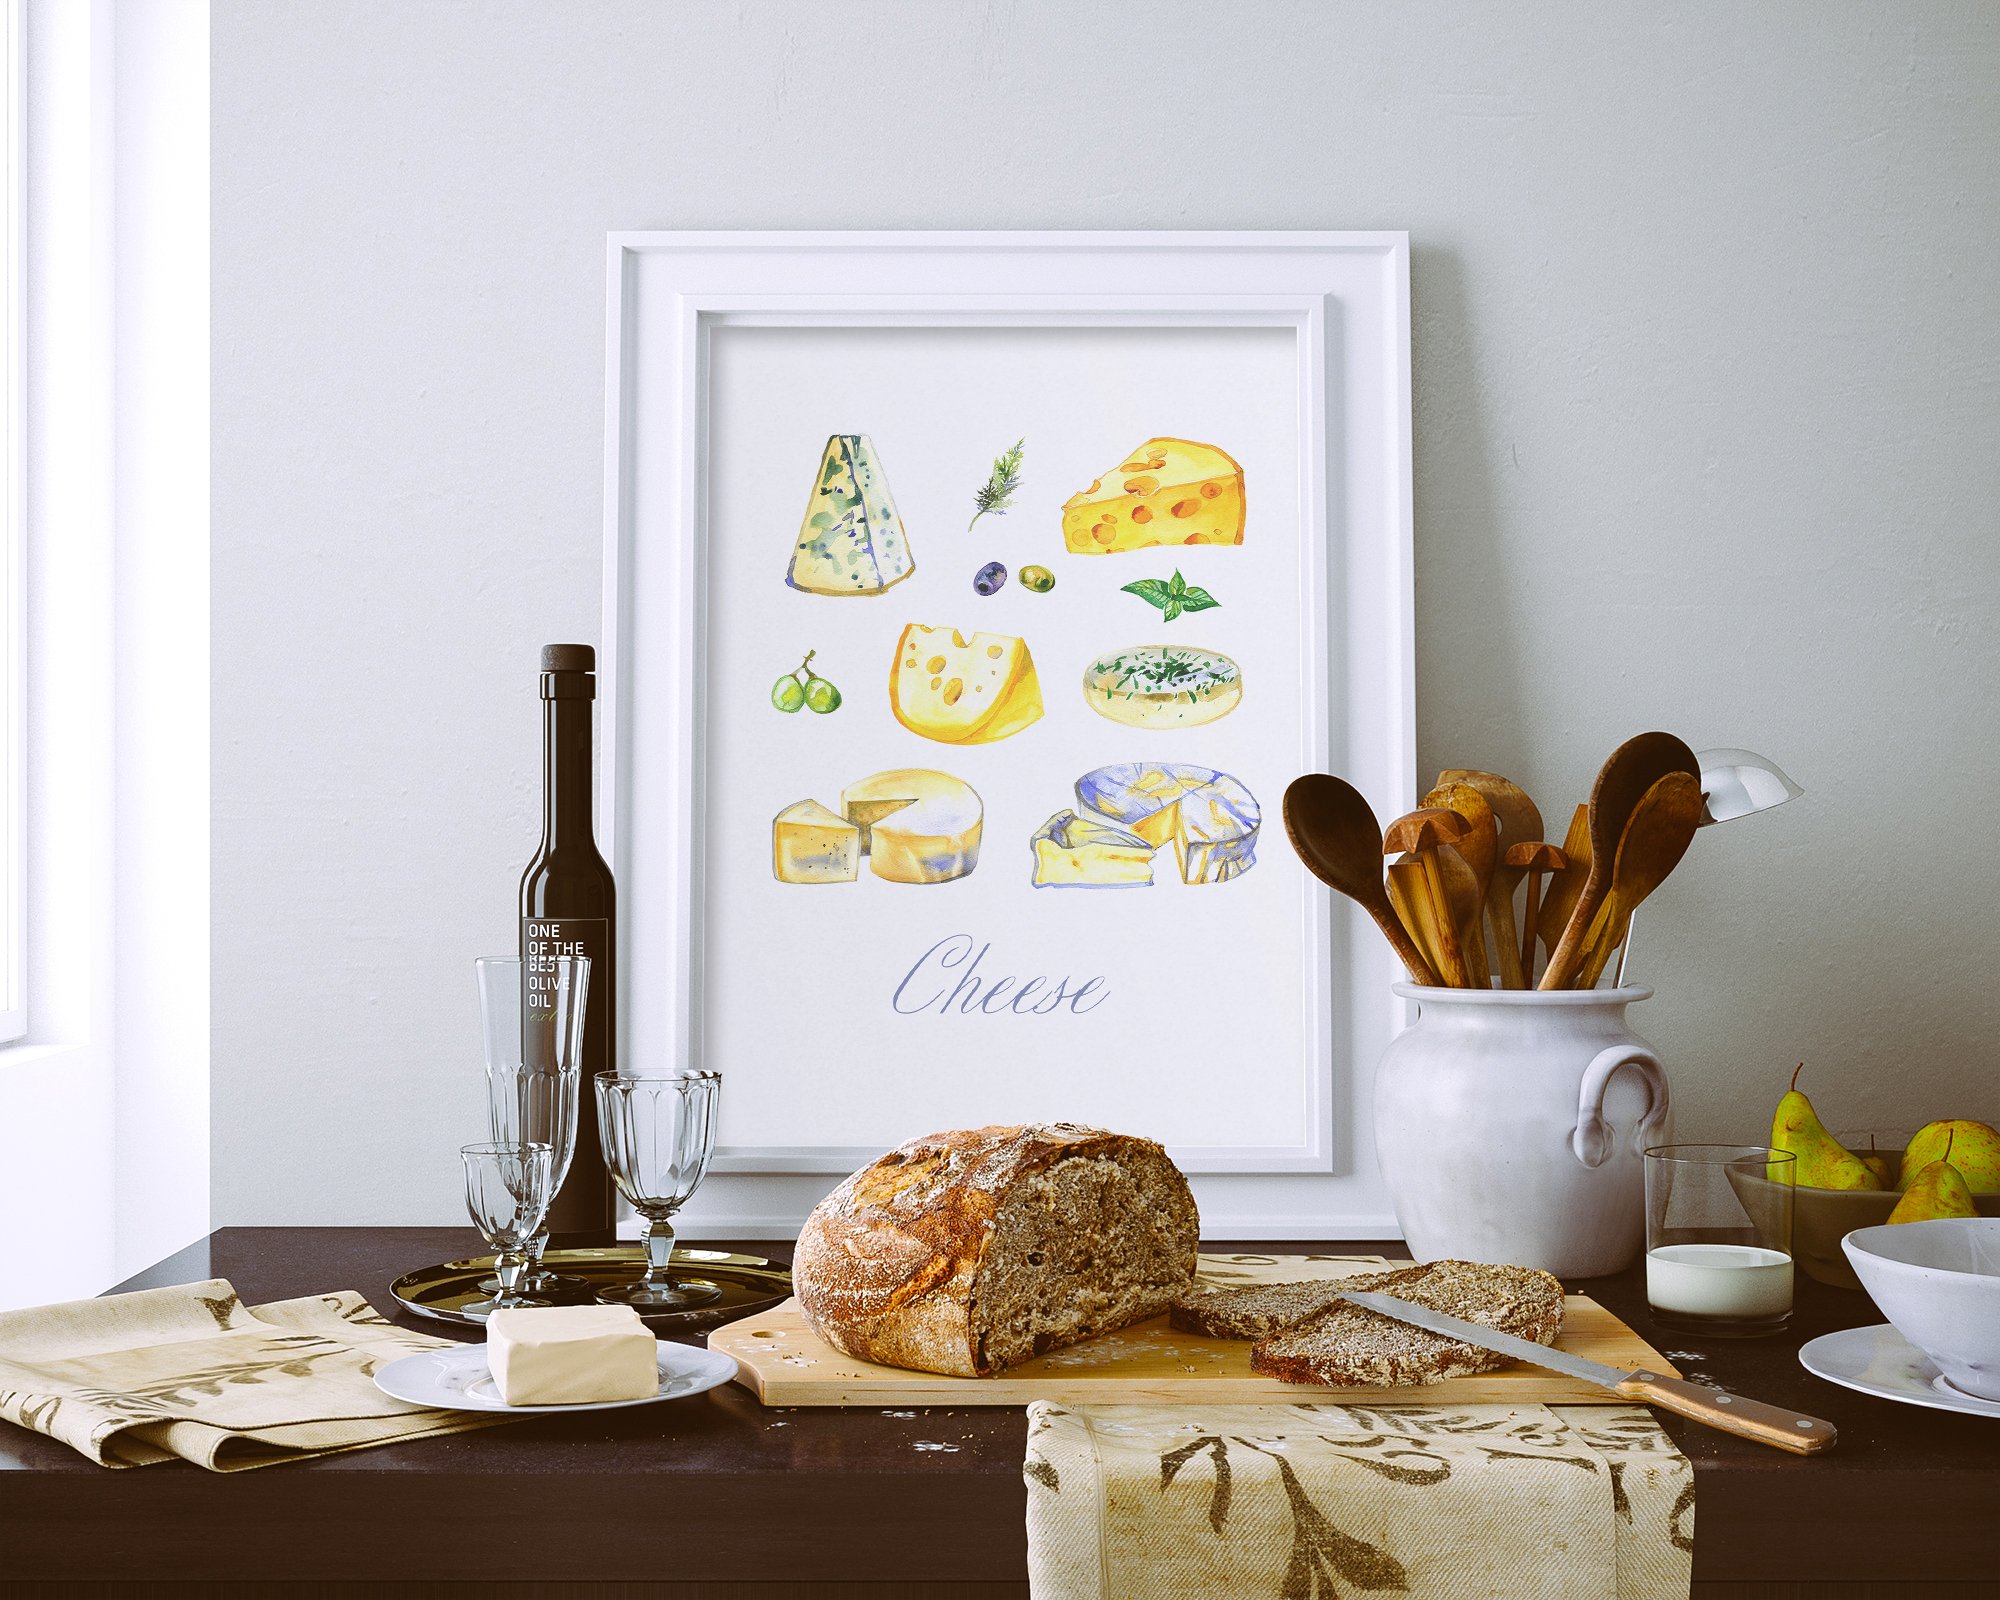 Colorful picture in a white frame with an image of different types of cheese.